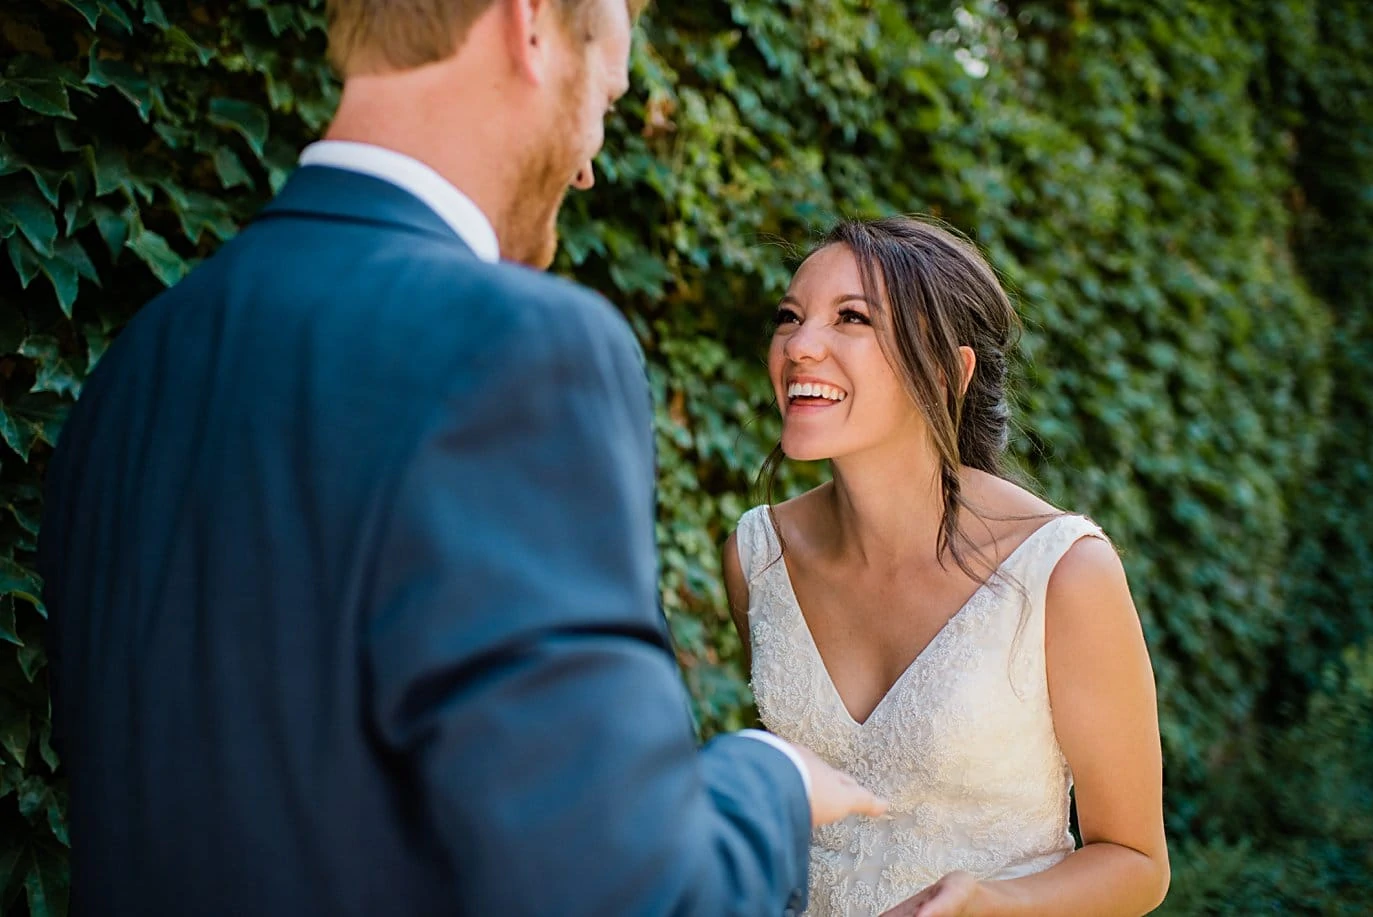 cute couples photos by ivy wall at Walker Fine Art Gallery Wedding by Fort Collins Wedding Photographer Jennie Crate